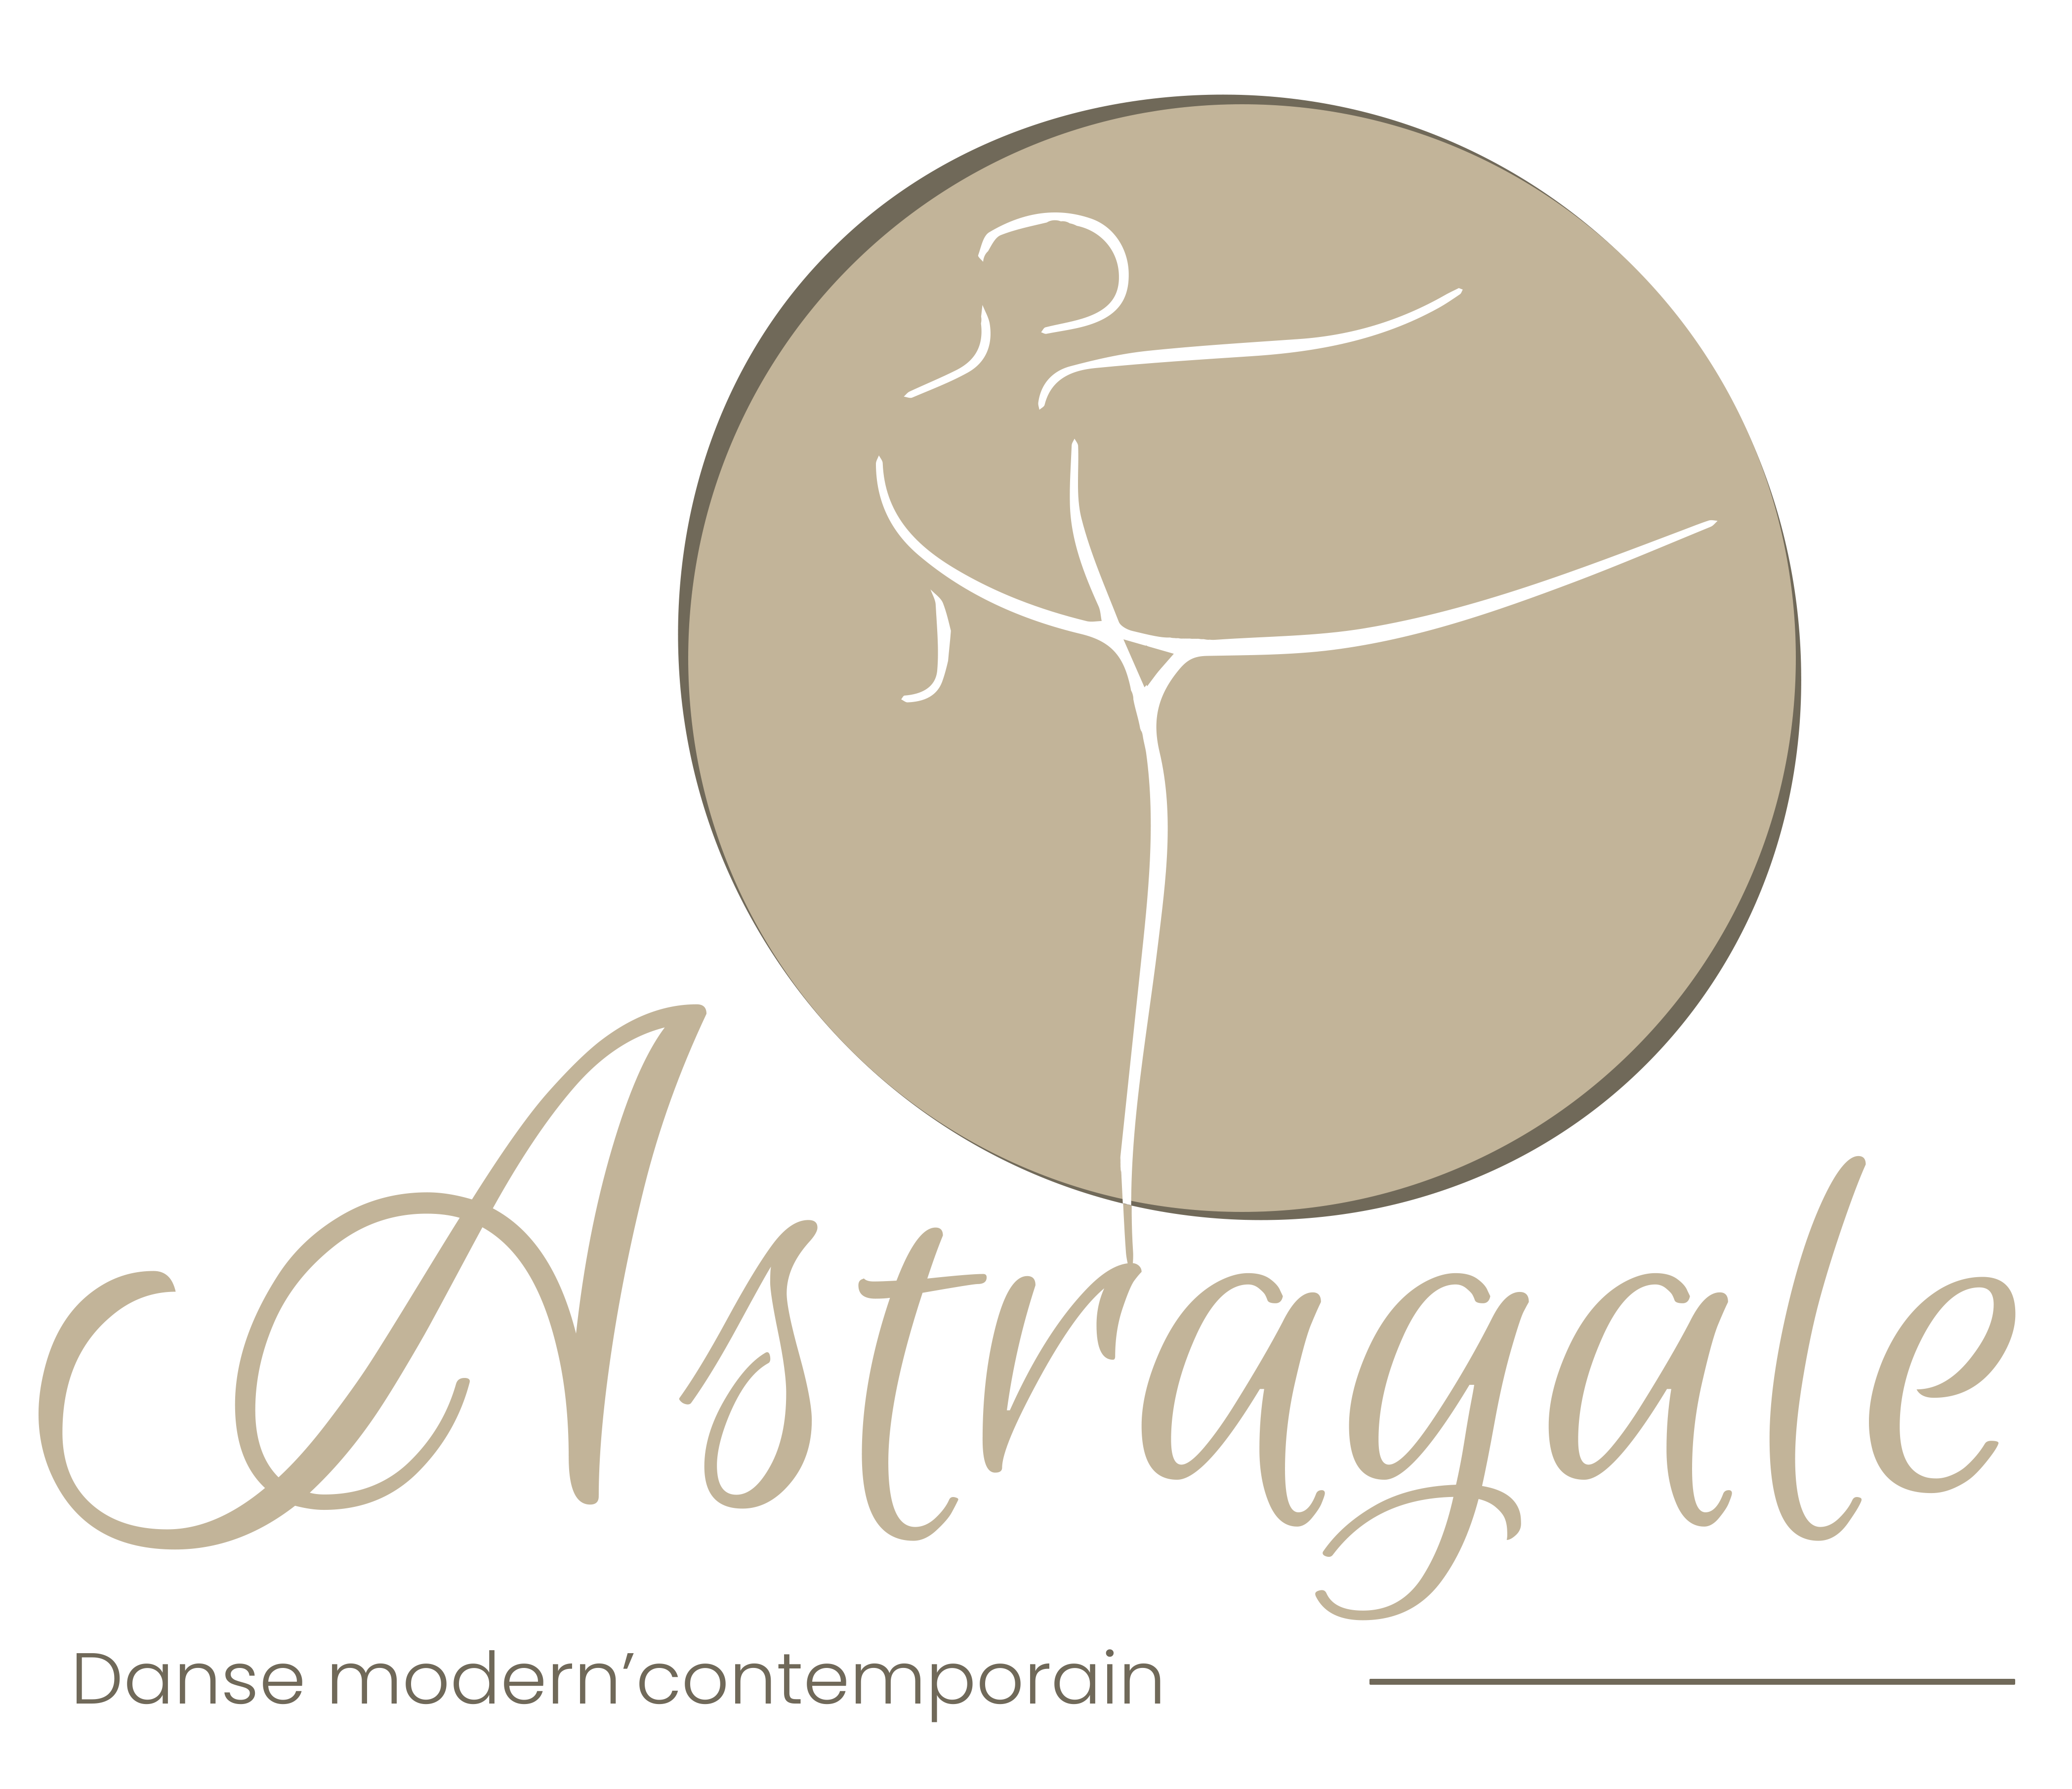 Astragale